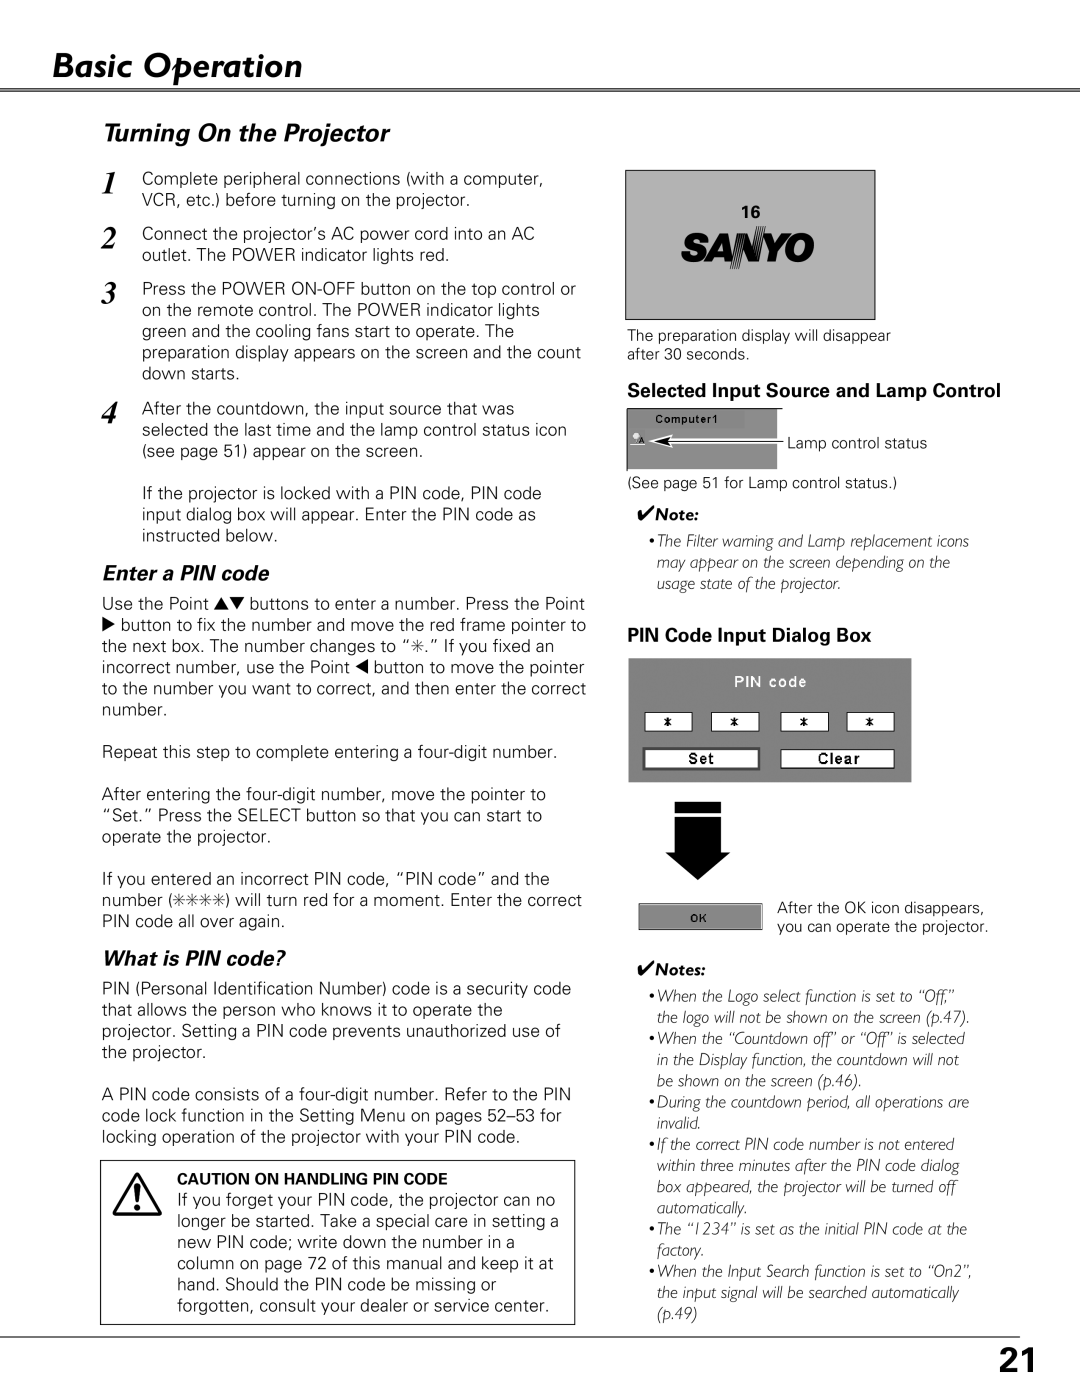 Sanyo PLC-XU84, PLC-XU87 owner manual Basic Operation, Turning On the Projector, Enter a PIN code, What is PIN code? 